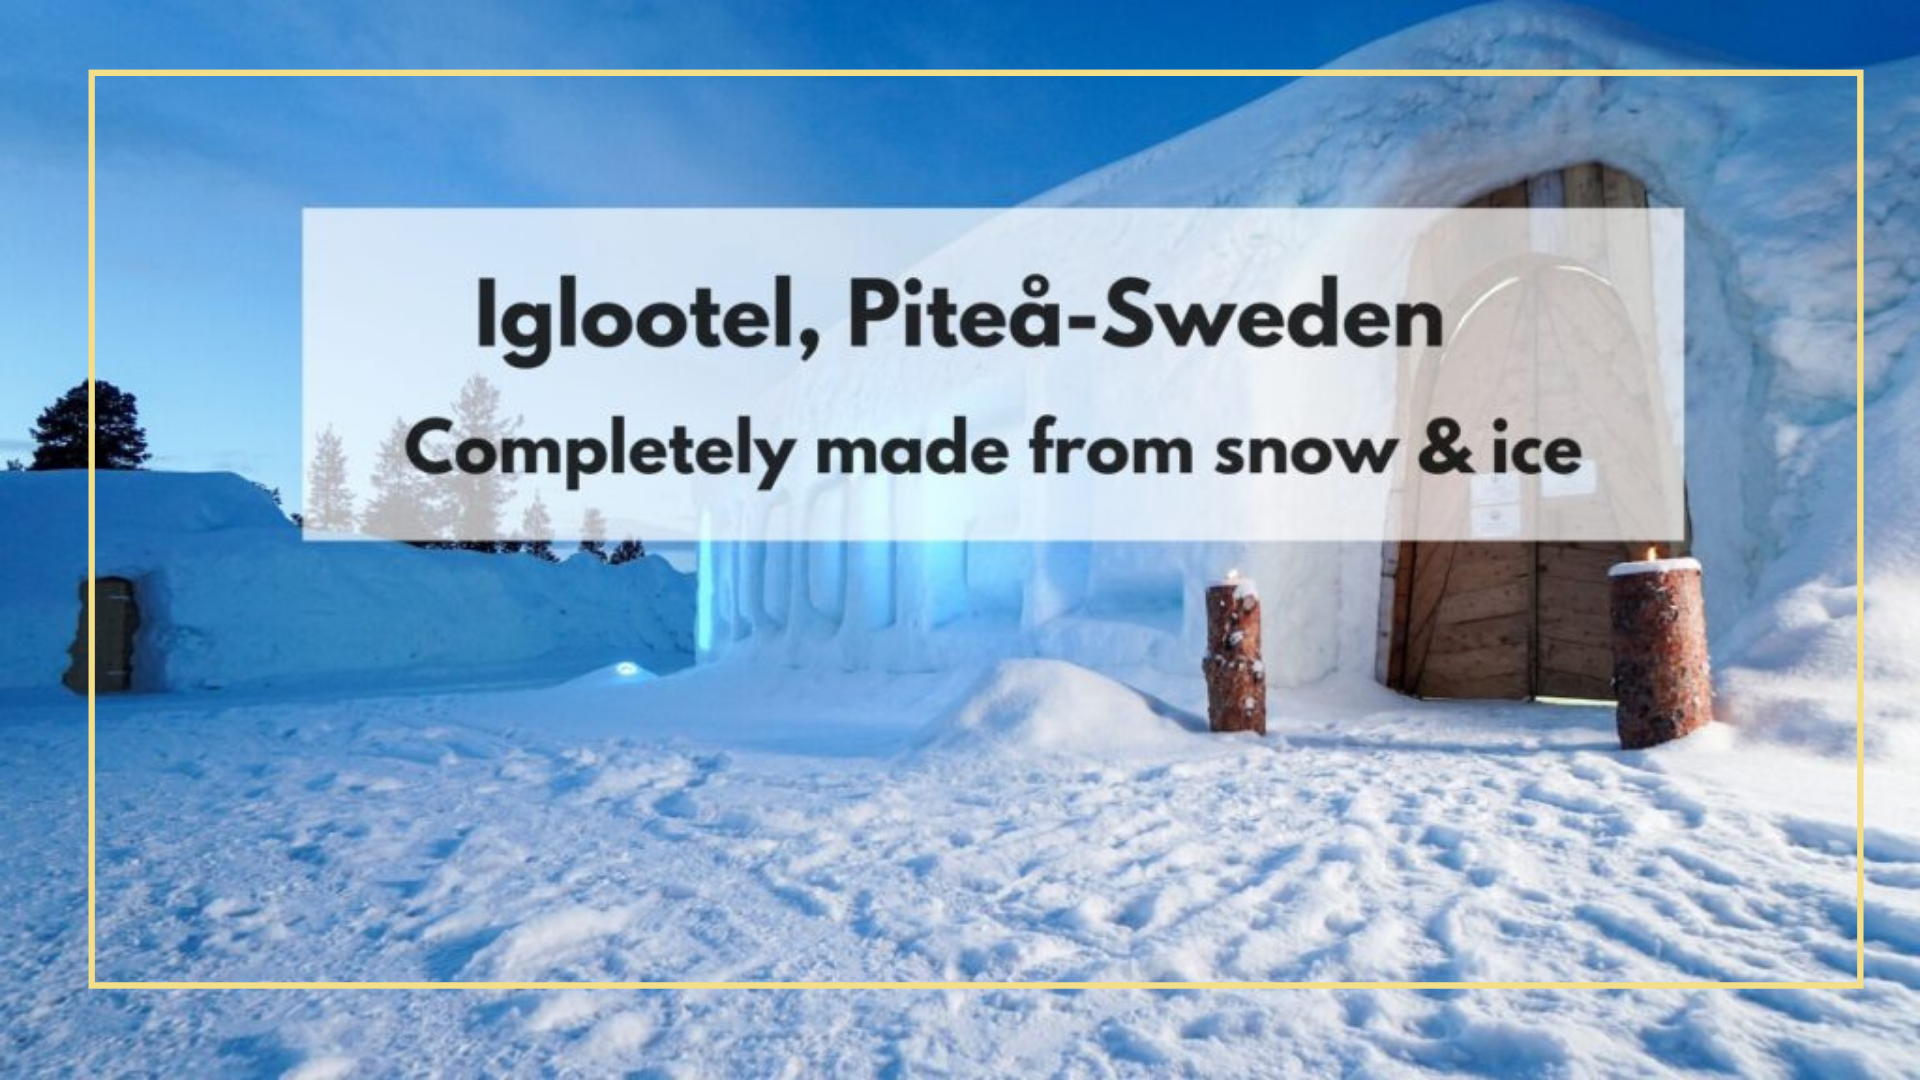 The IGLOOTEL, Lapland. An amazing opportunity for those looking for unusual winter experiences